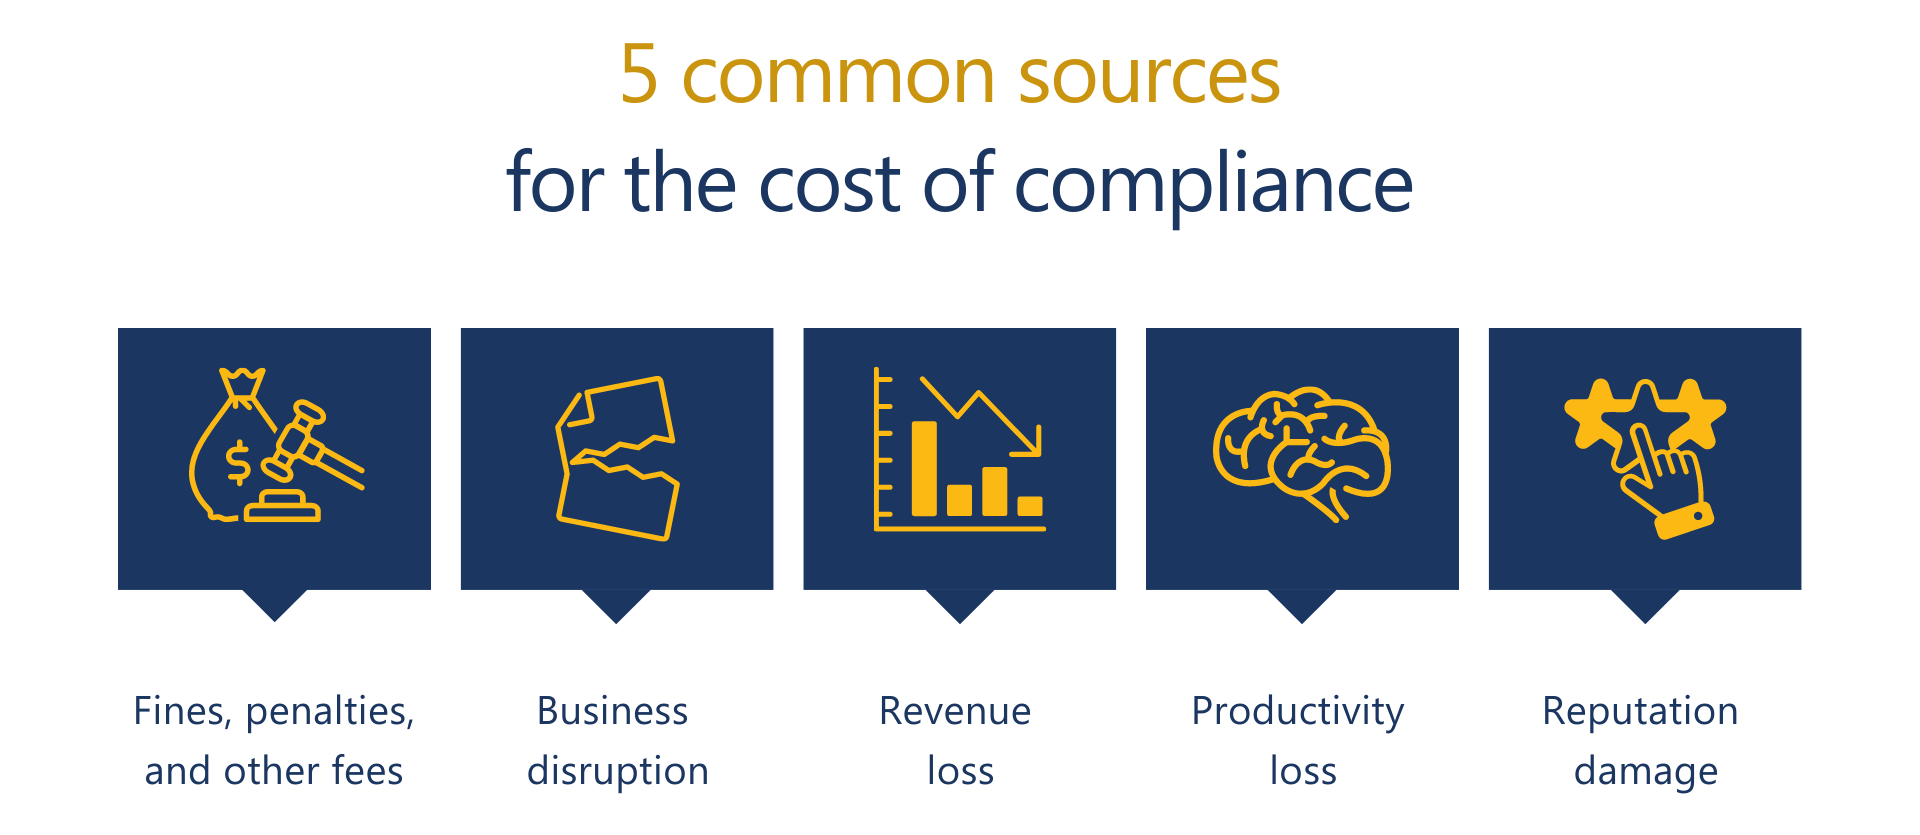 5 most common sources for cost of compliance